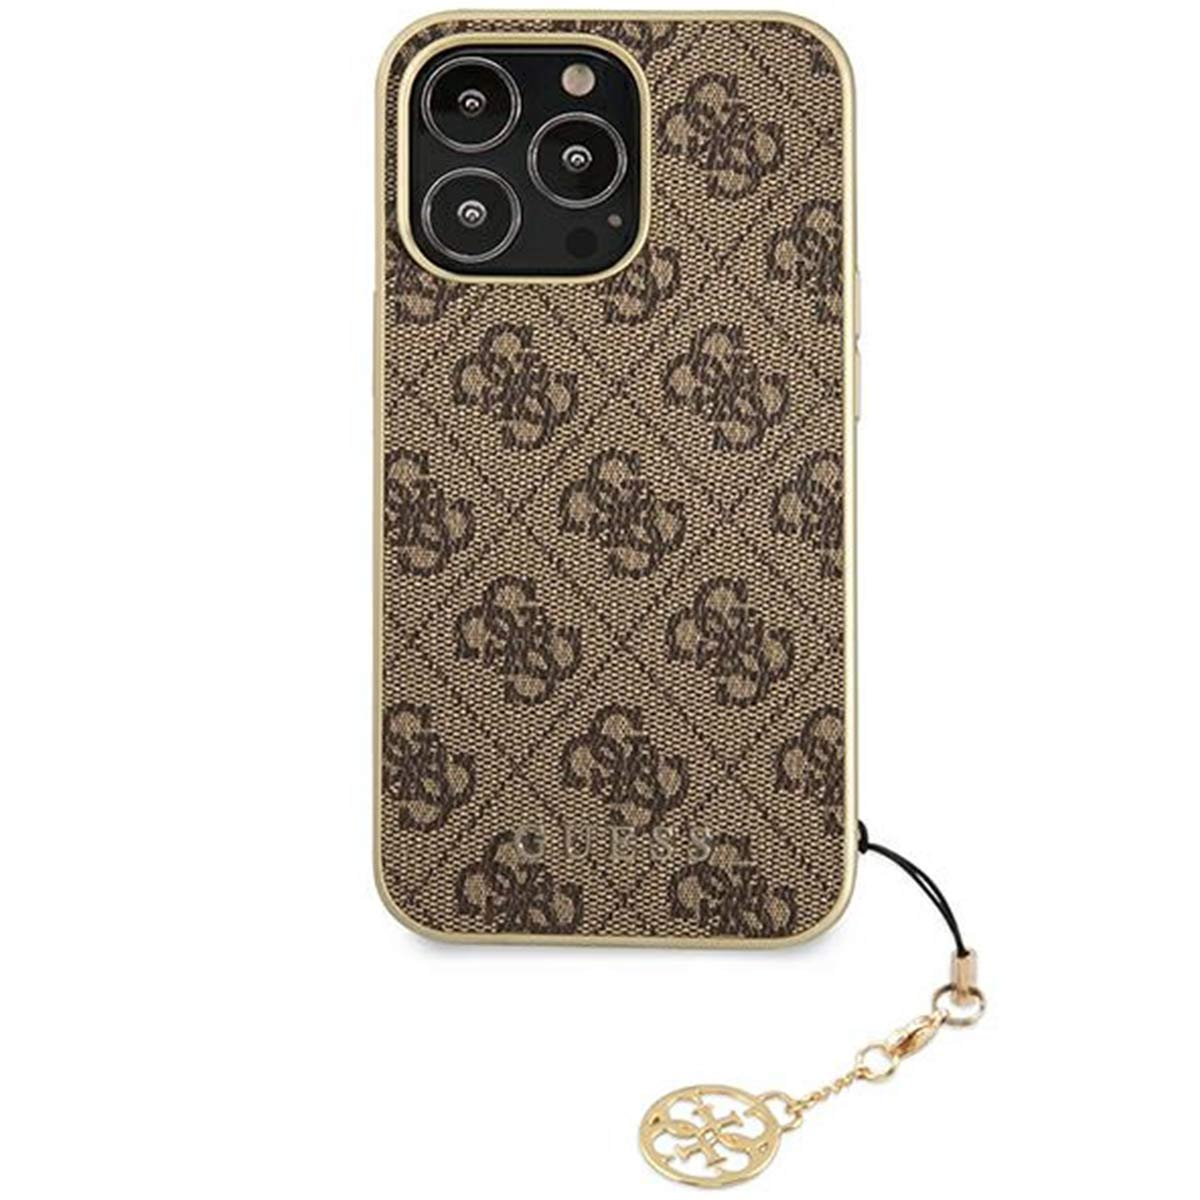 GUESS Guess Pro Cover, 14 Collection iPhone Case - Full iPhone Charms Max Max, Multicolor 14 Apple, for 4G (Brown), Pro